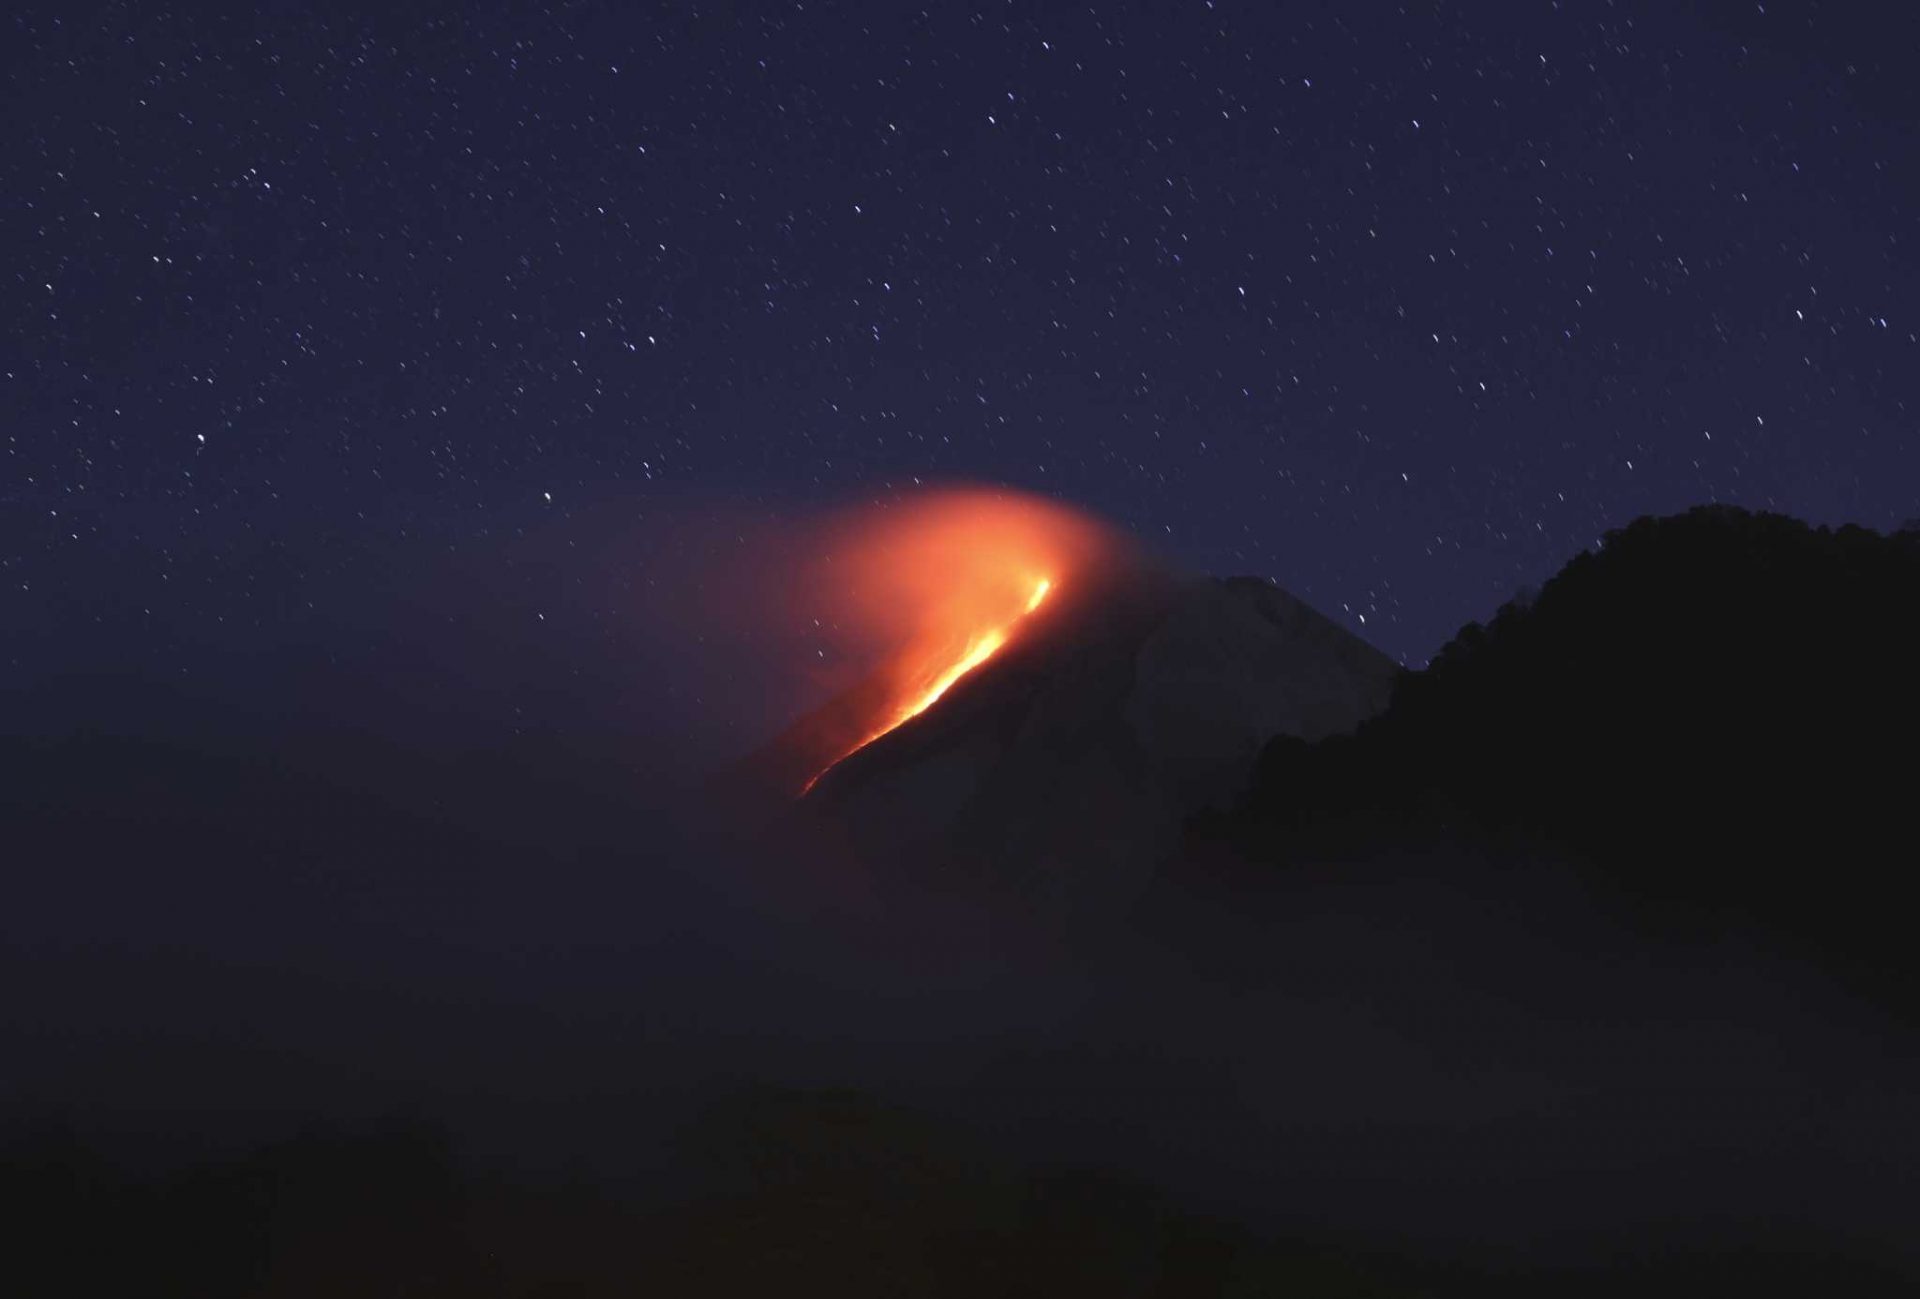 Lava streams from Indonesia’s Mount Merapi in recent eruption